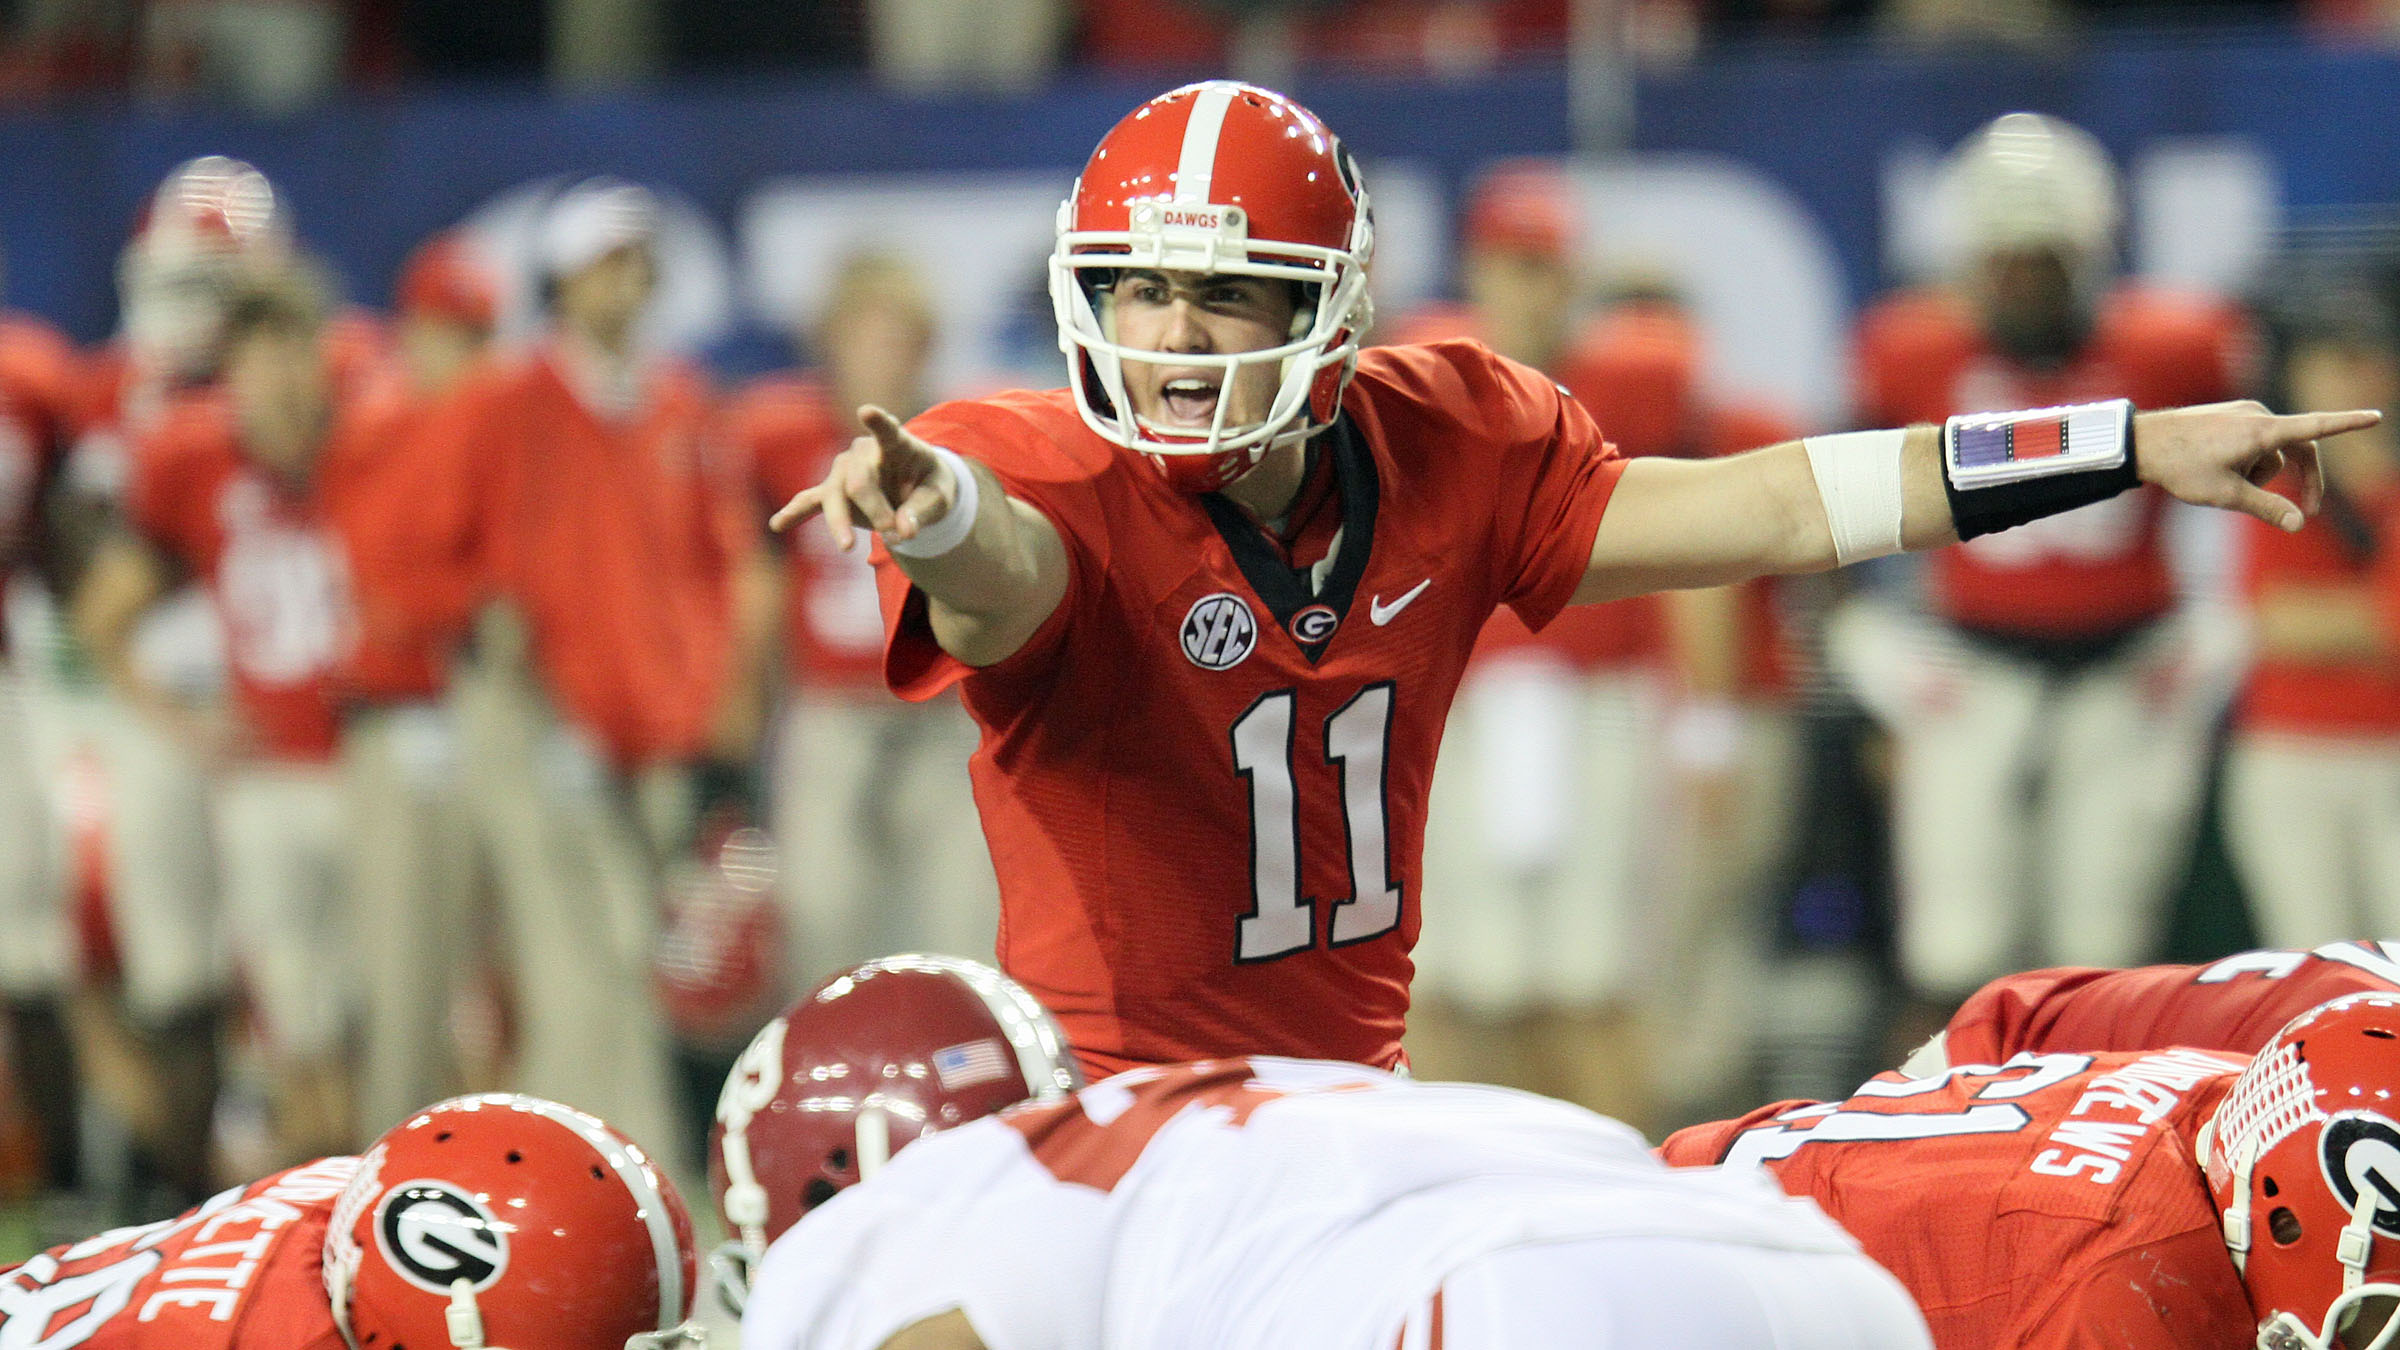 Quarterback Aaron Murray of UGA in the 2012 SEC Championship Game (Photo by Jim Hipple)